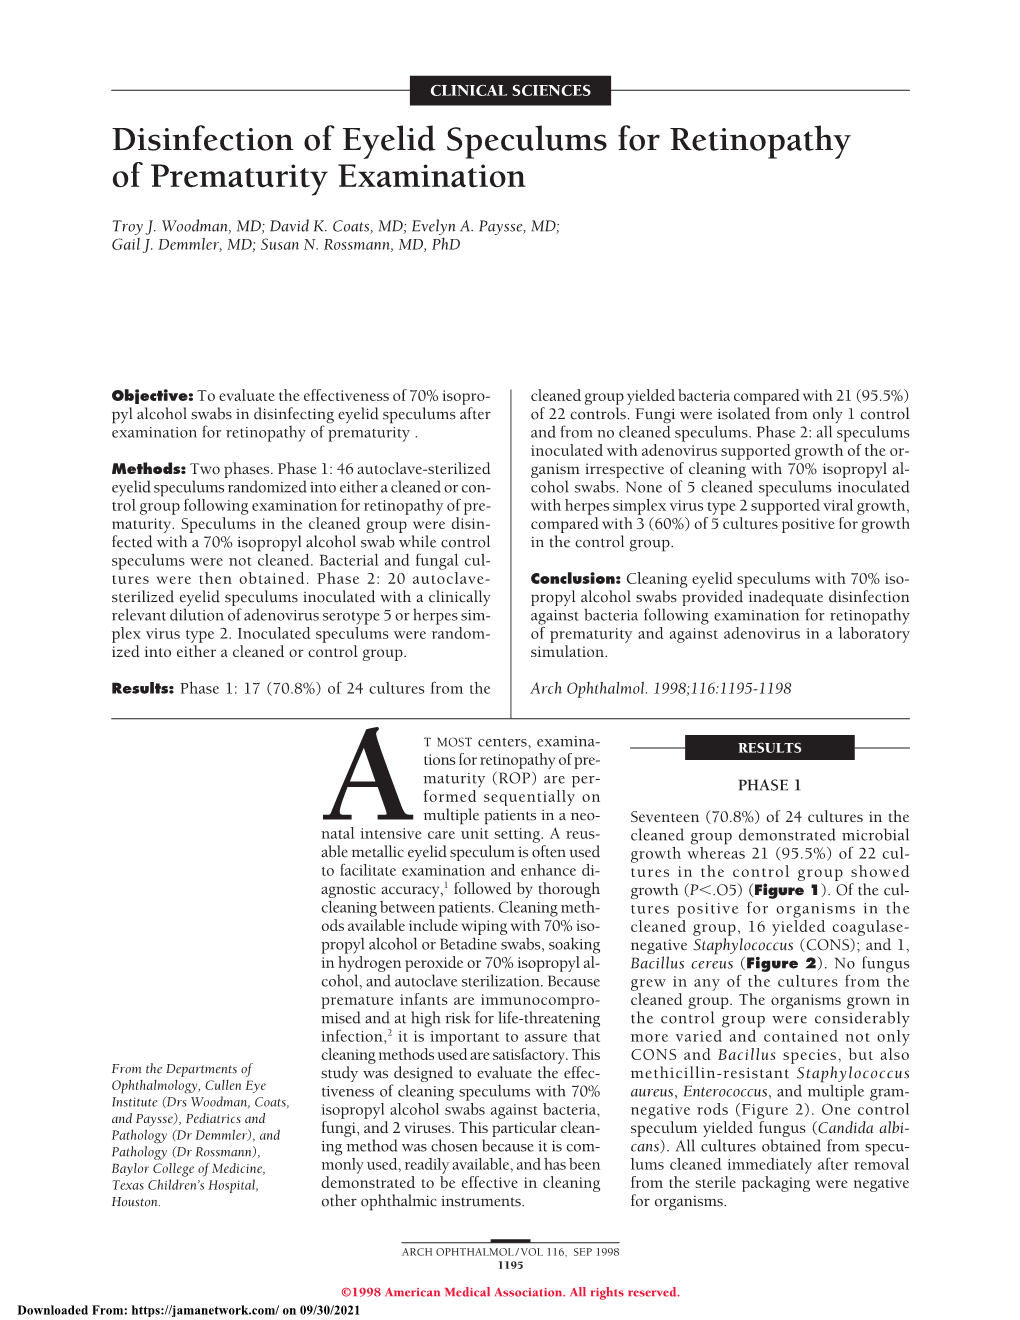 Disinfection of Eyelid Speculums for Retinopathy of Prematurity Examination